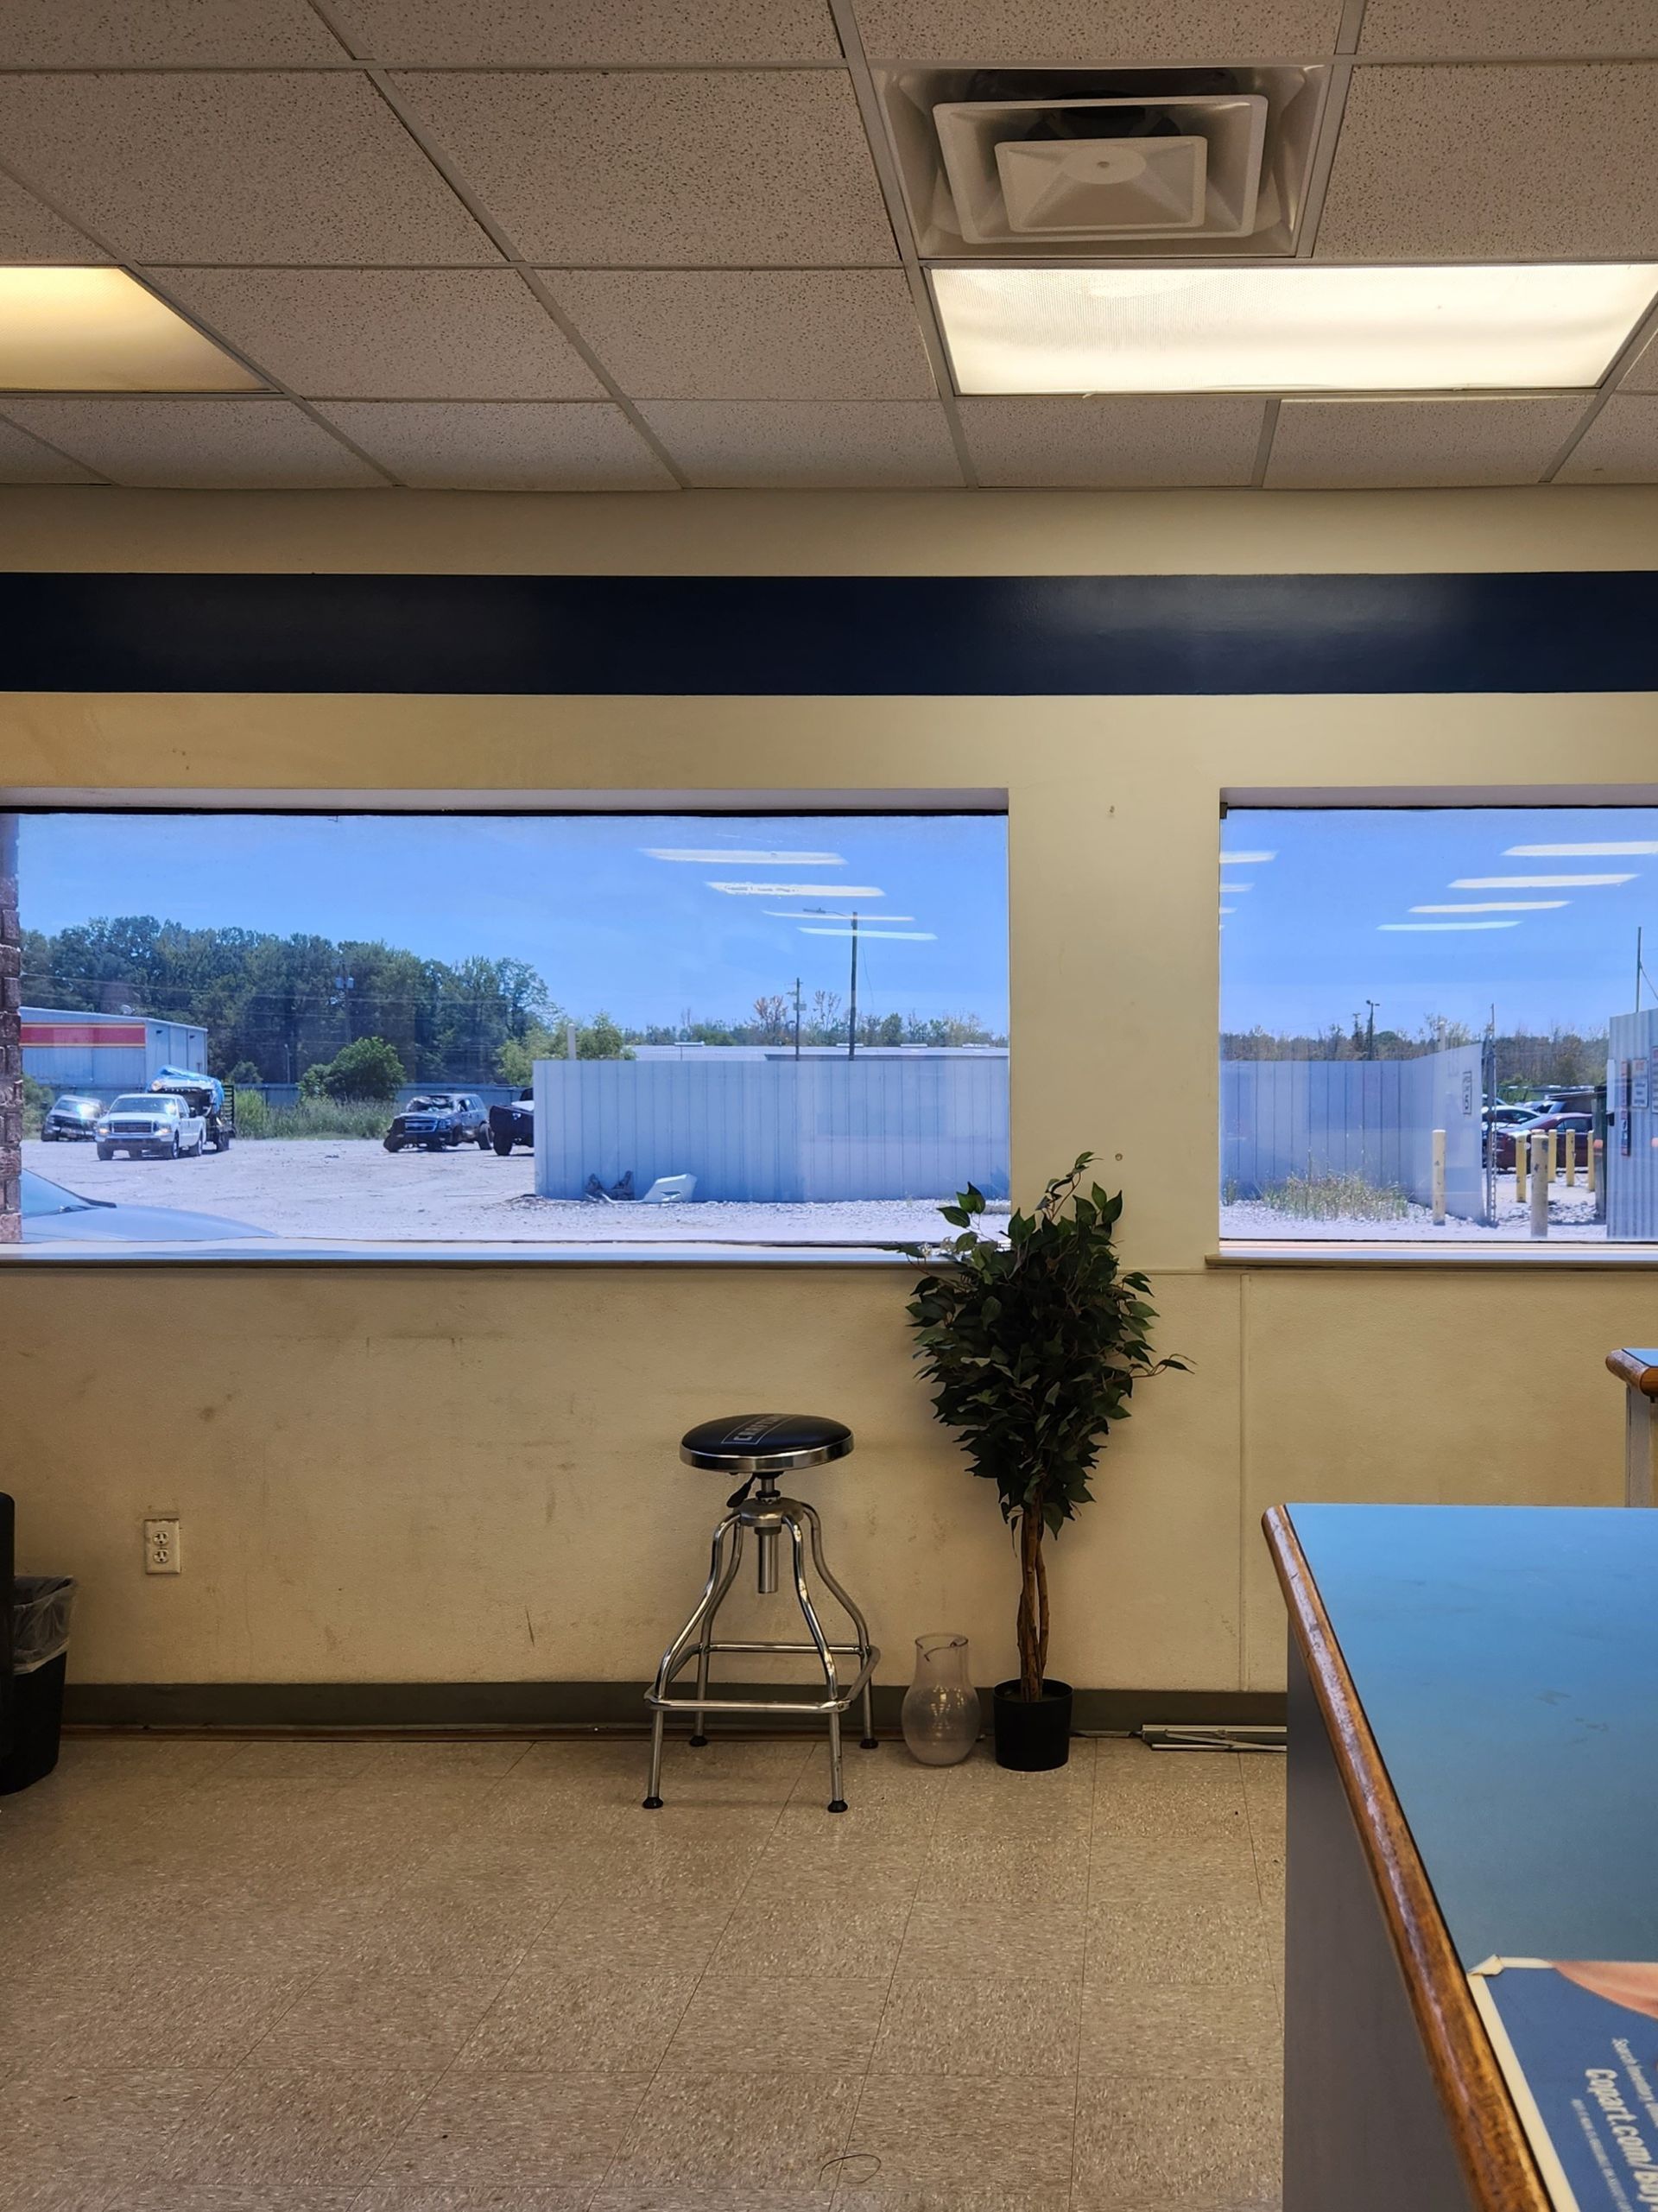 commercial tinting - both heat and Sun glare were cut by over 91%. Leaving the perfect space inside after SPF Ultra tint.